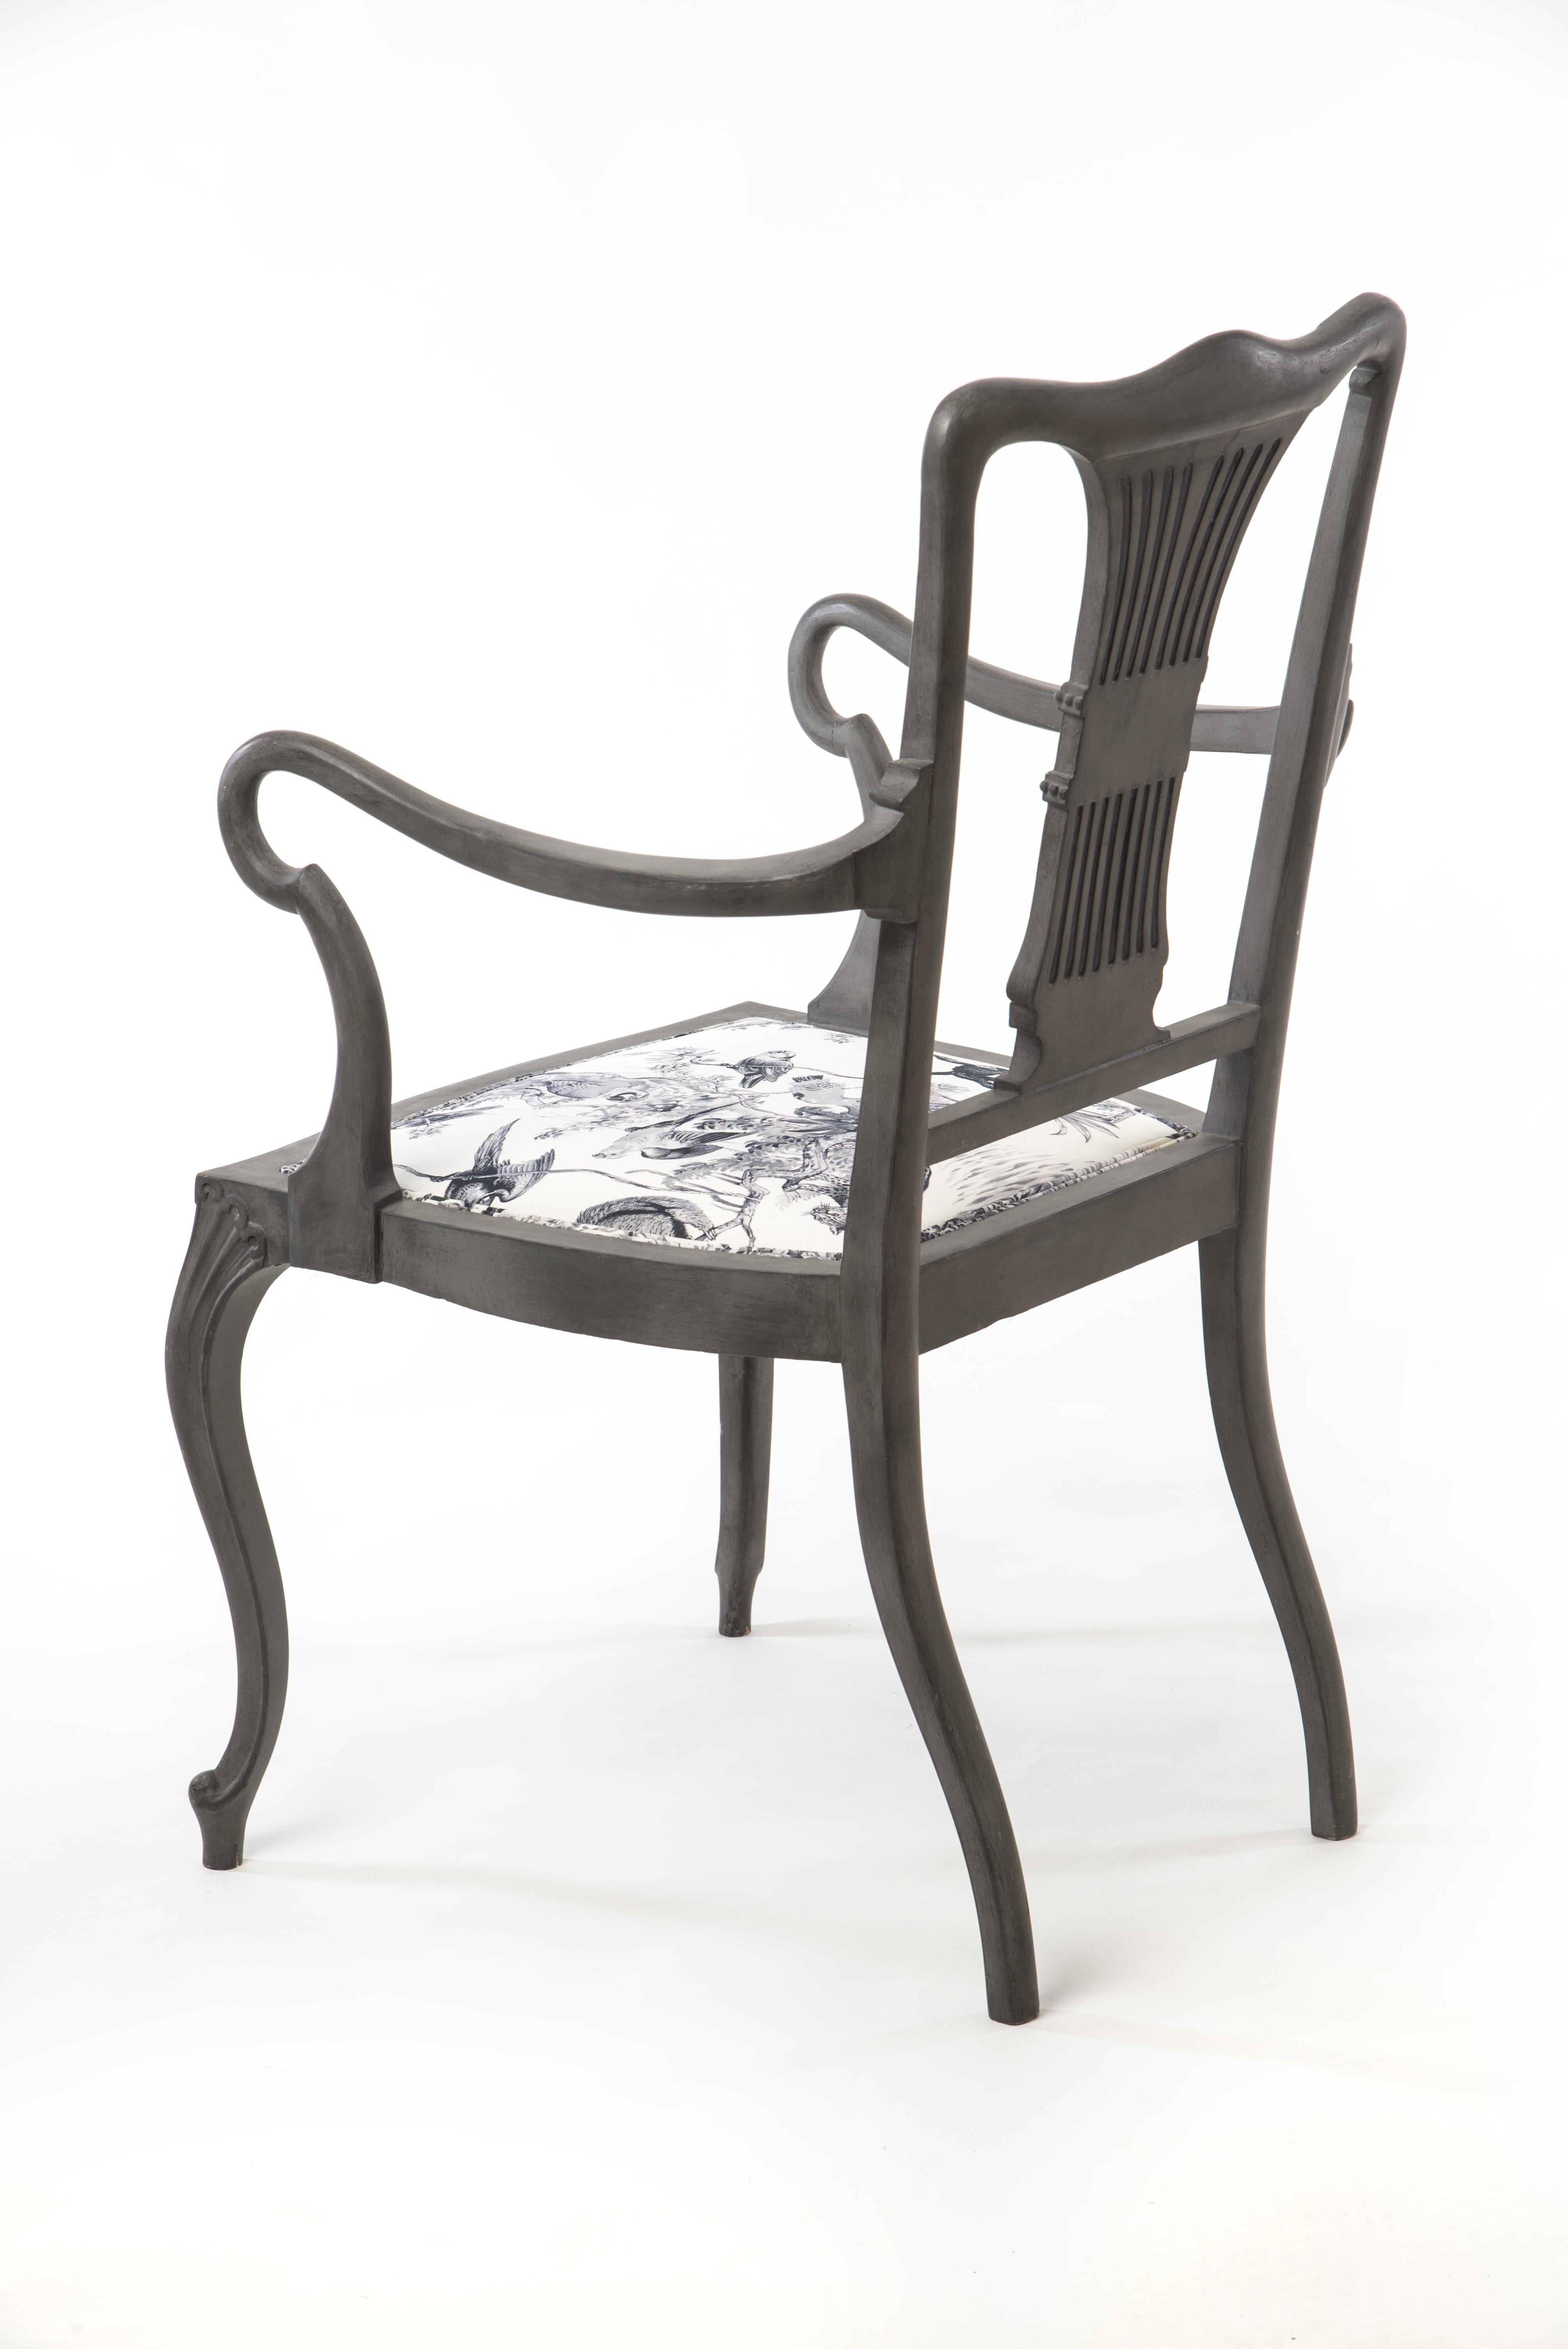 Gorgeous 19th century chair with a very interesting form and appearance. New paint and upholstered with Hermès fabric that perfectly matches the unique form of the chair.

 